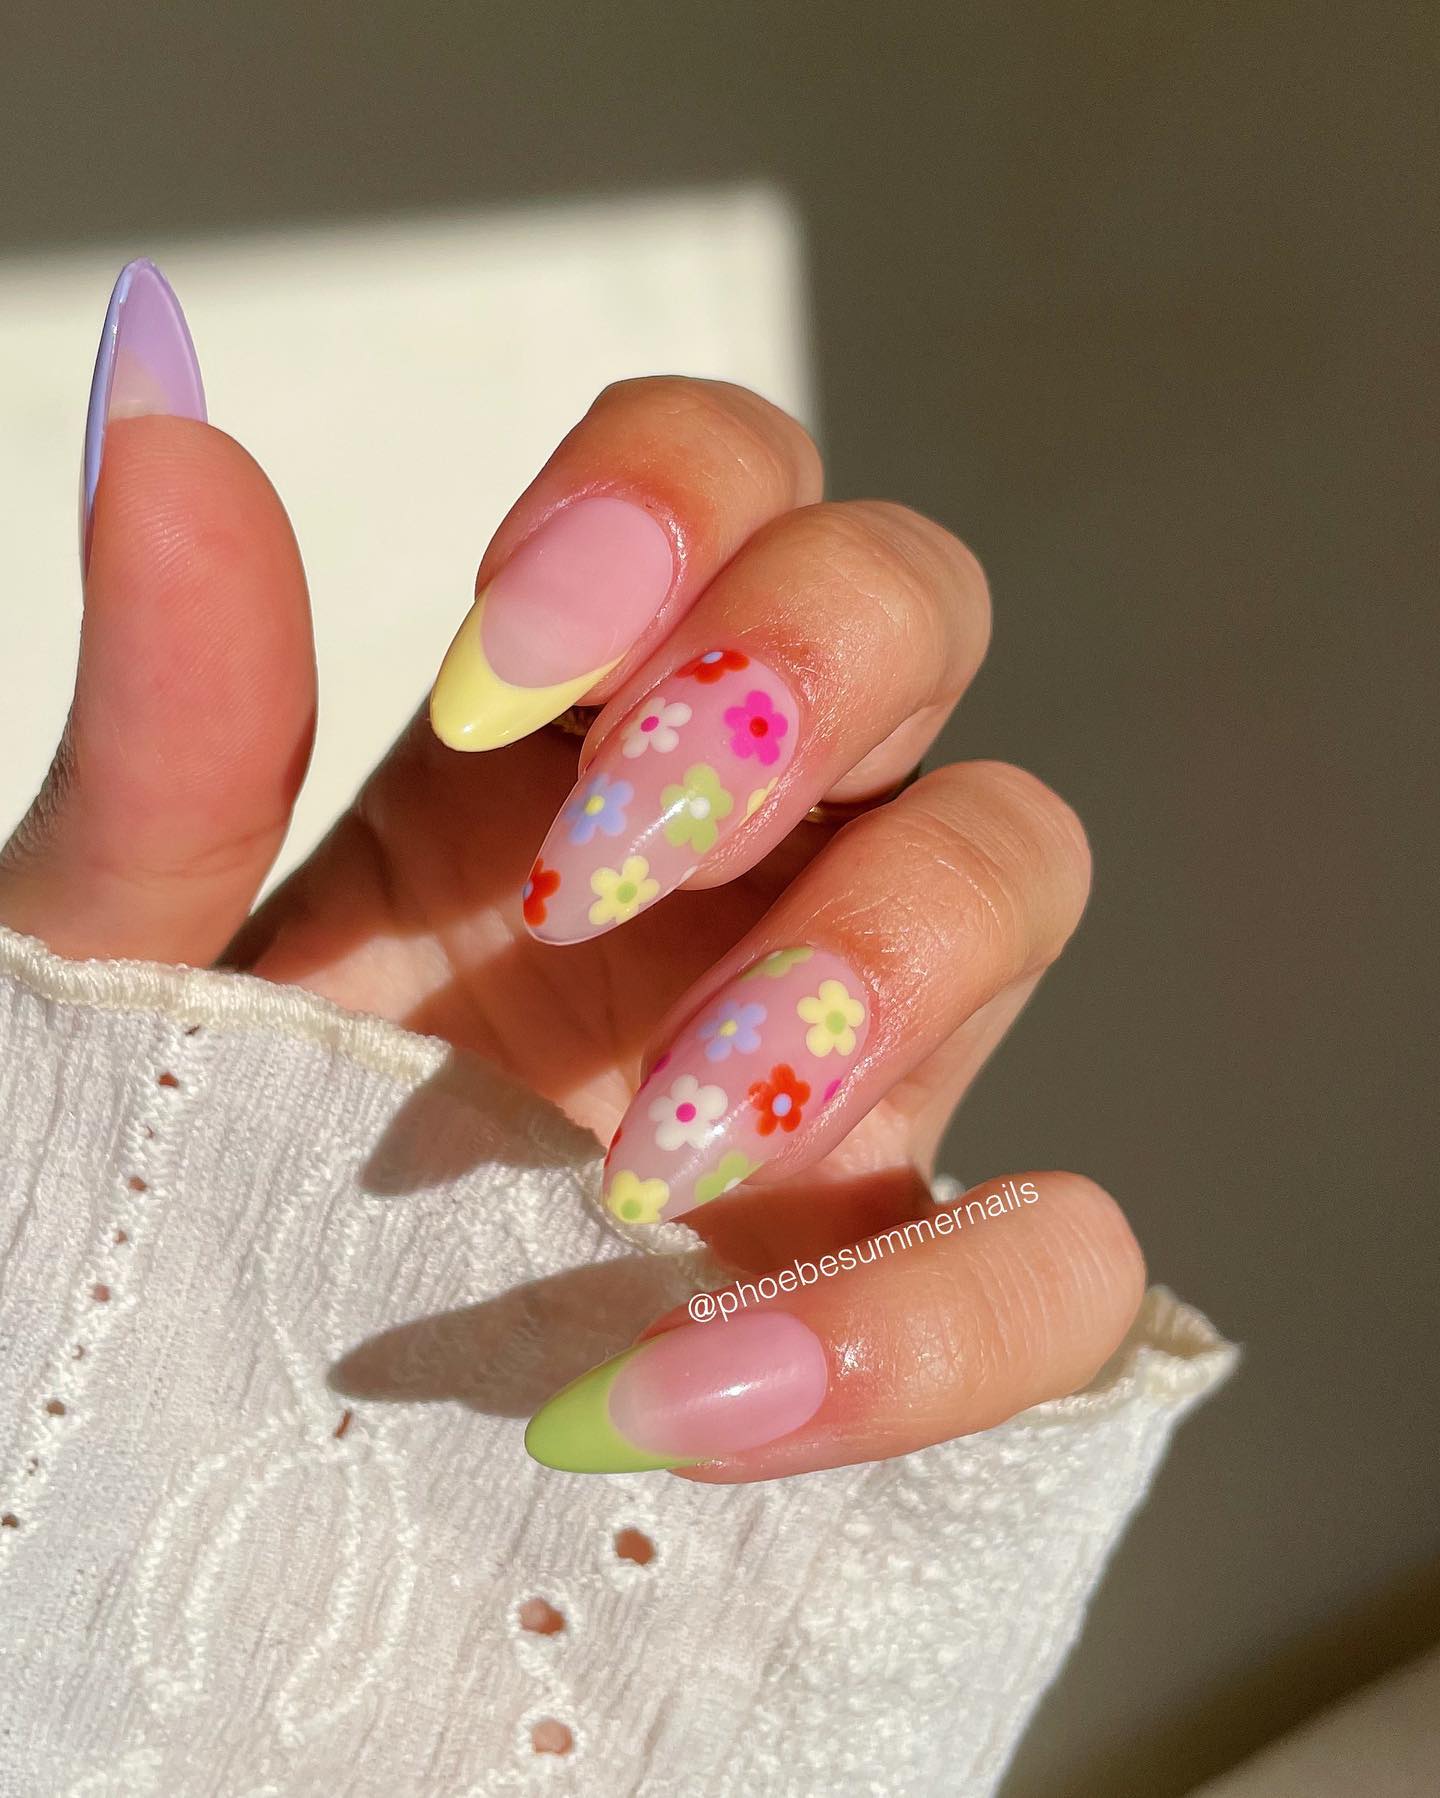 100+ Short Nail Designs You’ll Want To Try This Year images 72